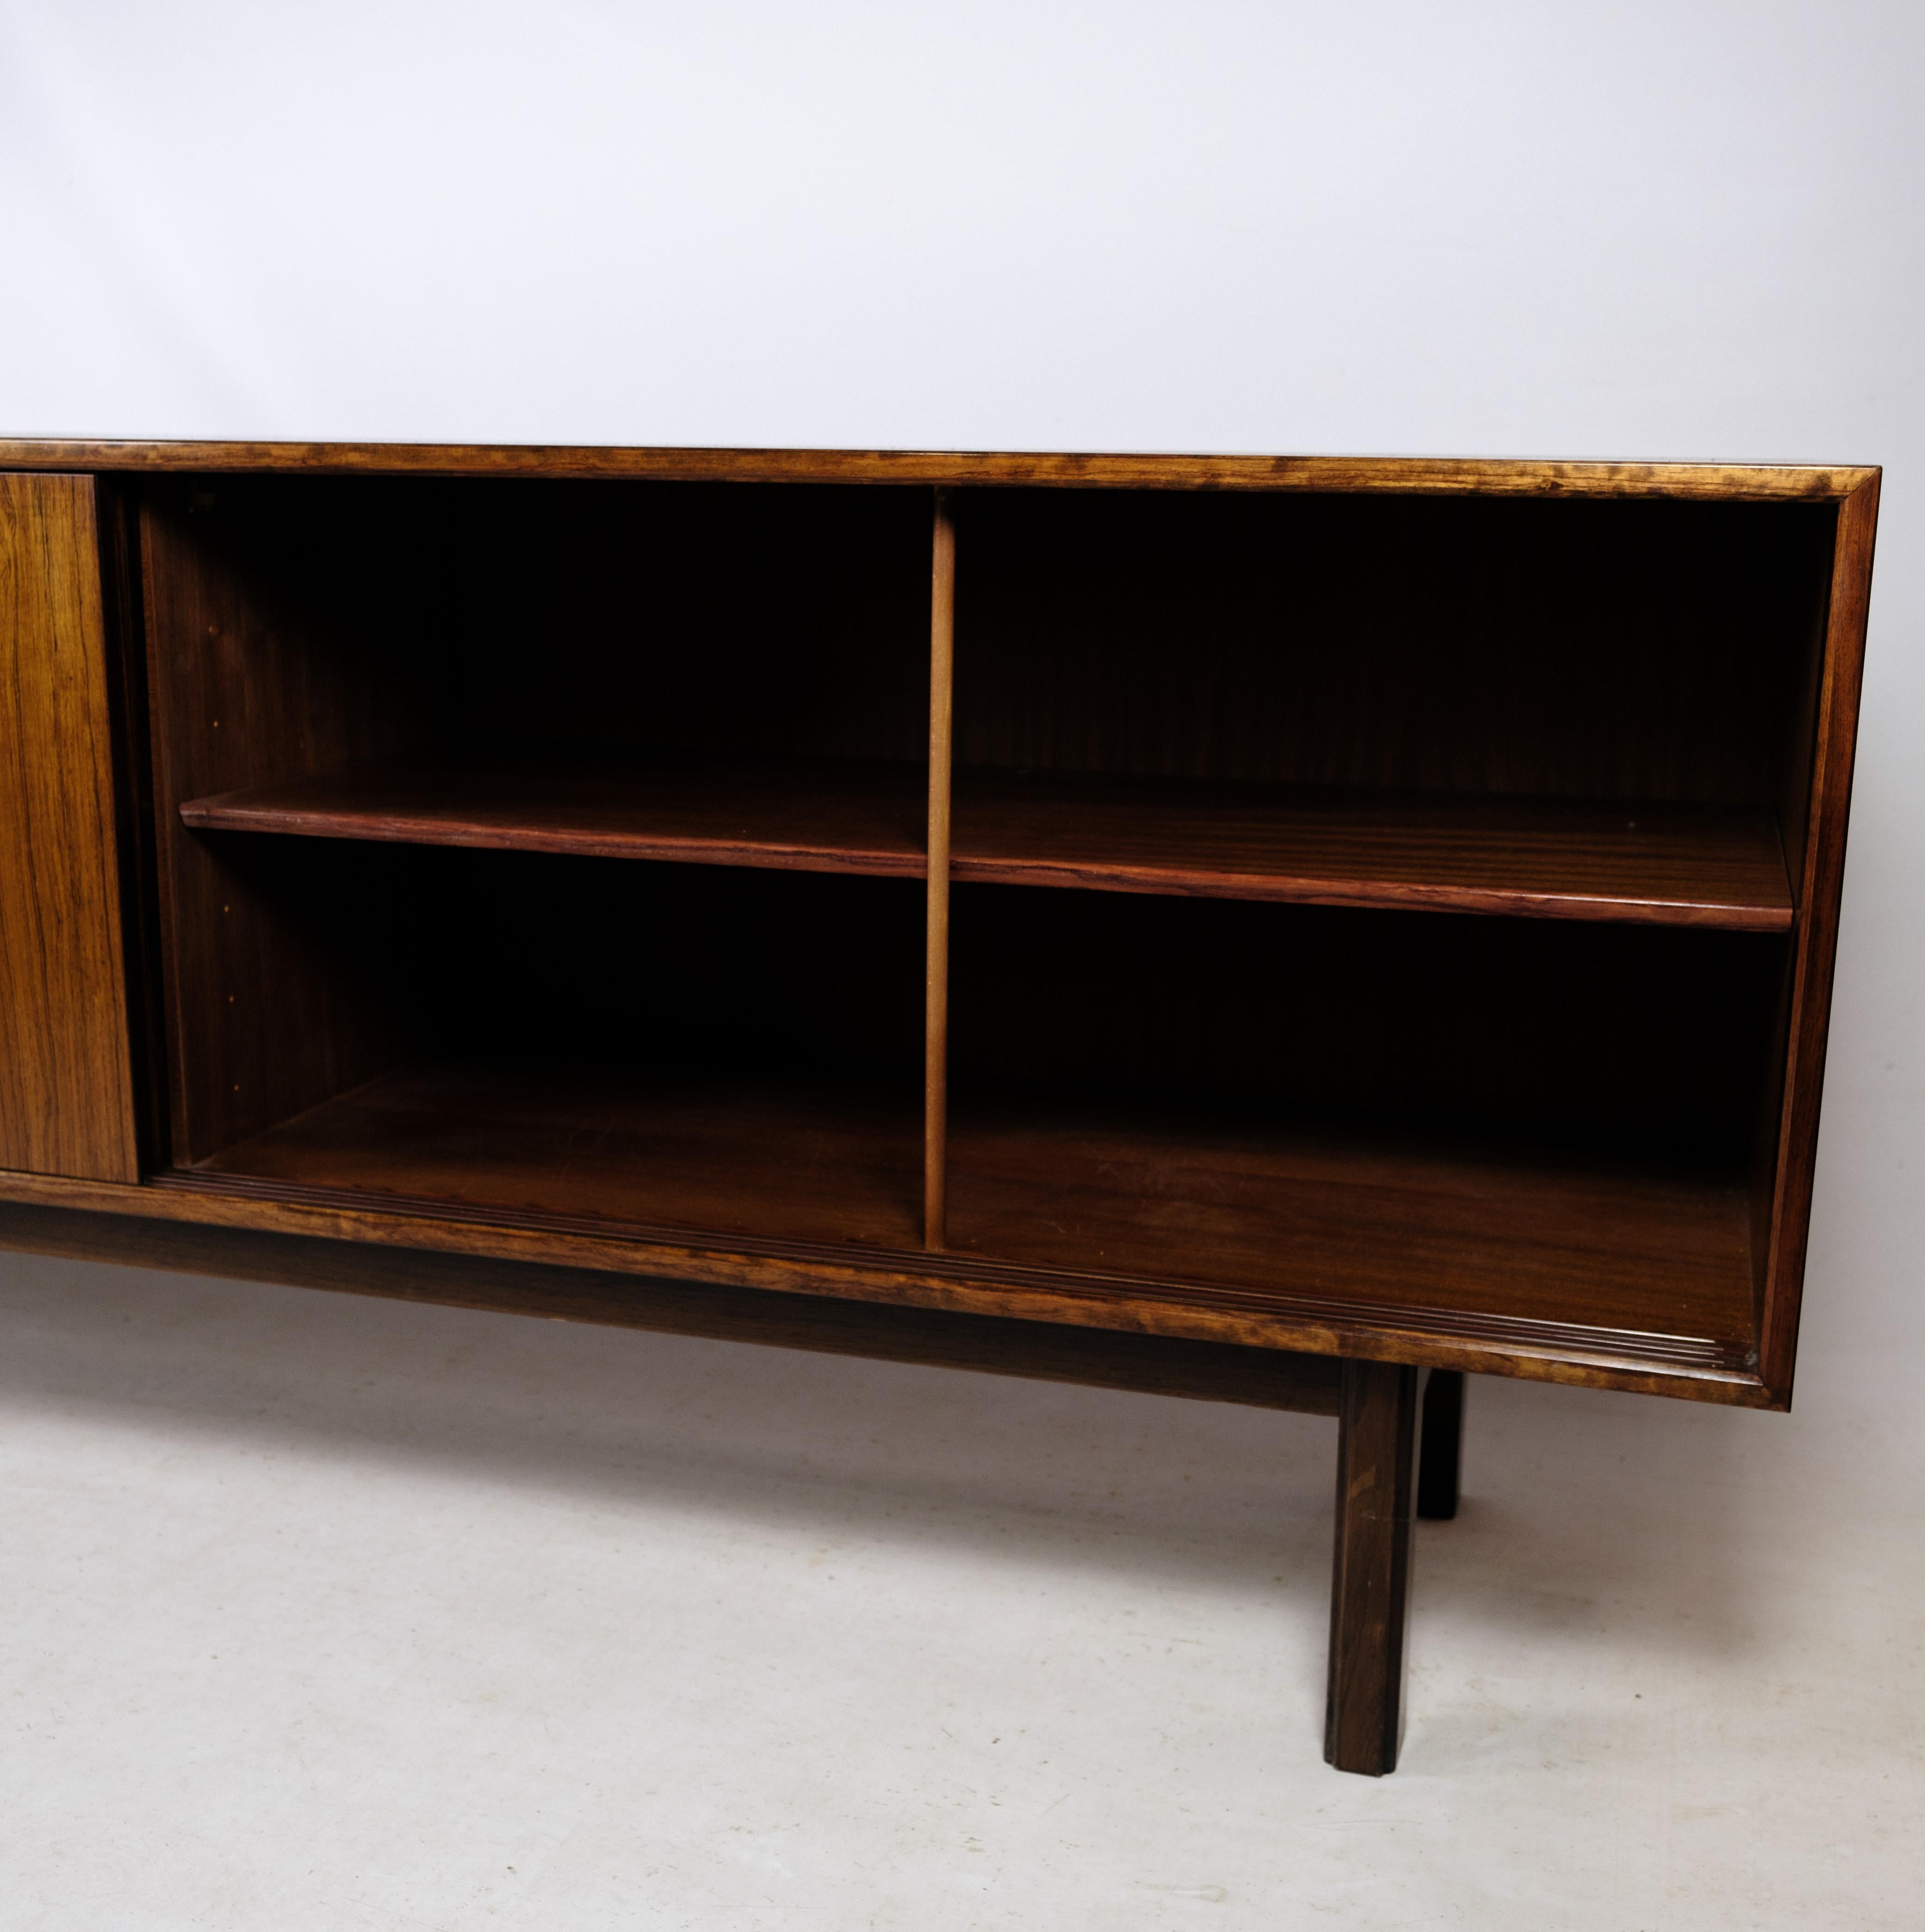 Mid-Century Modern Low Sideboard By Omann Junior Made In Rosewood, Danish Design From 1960s For Sale